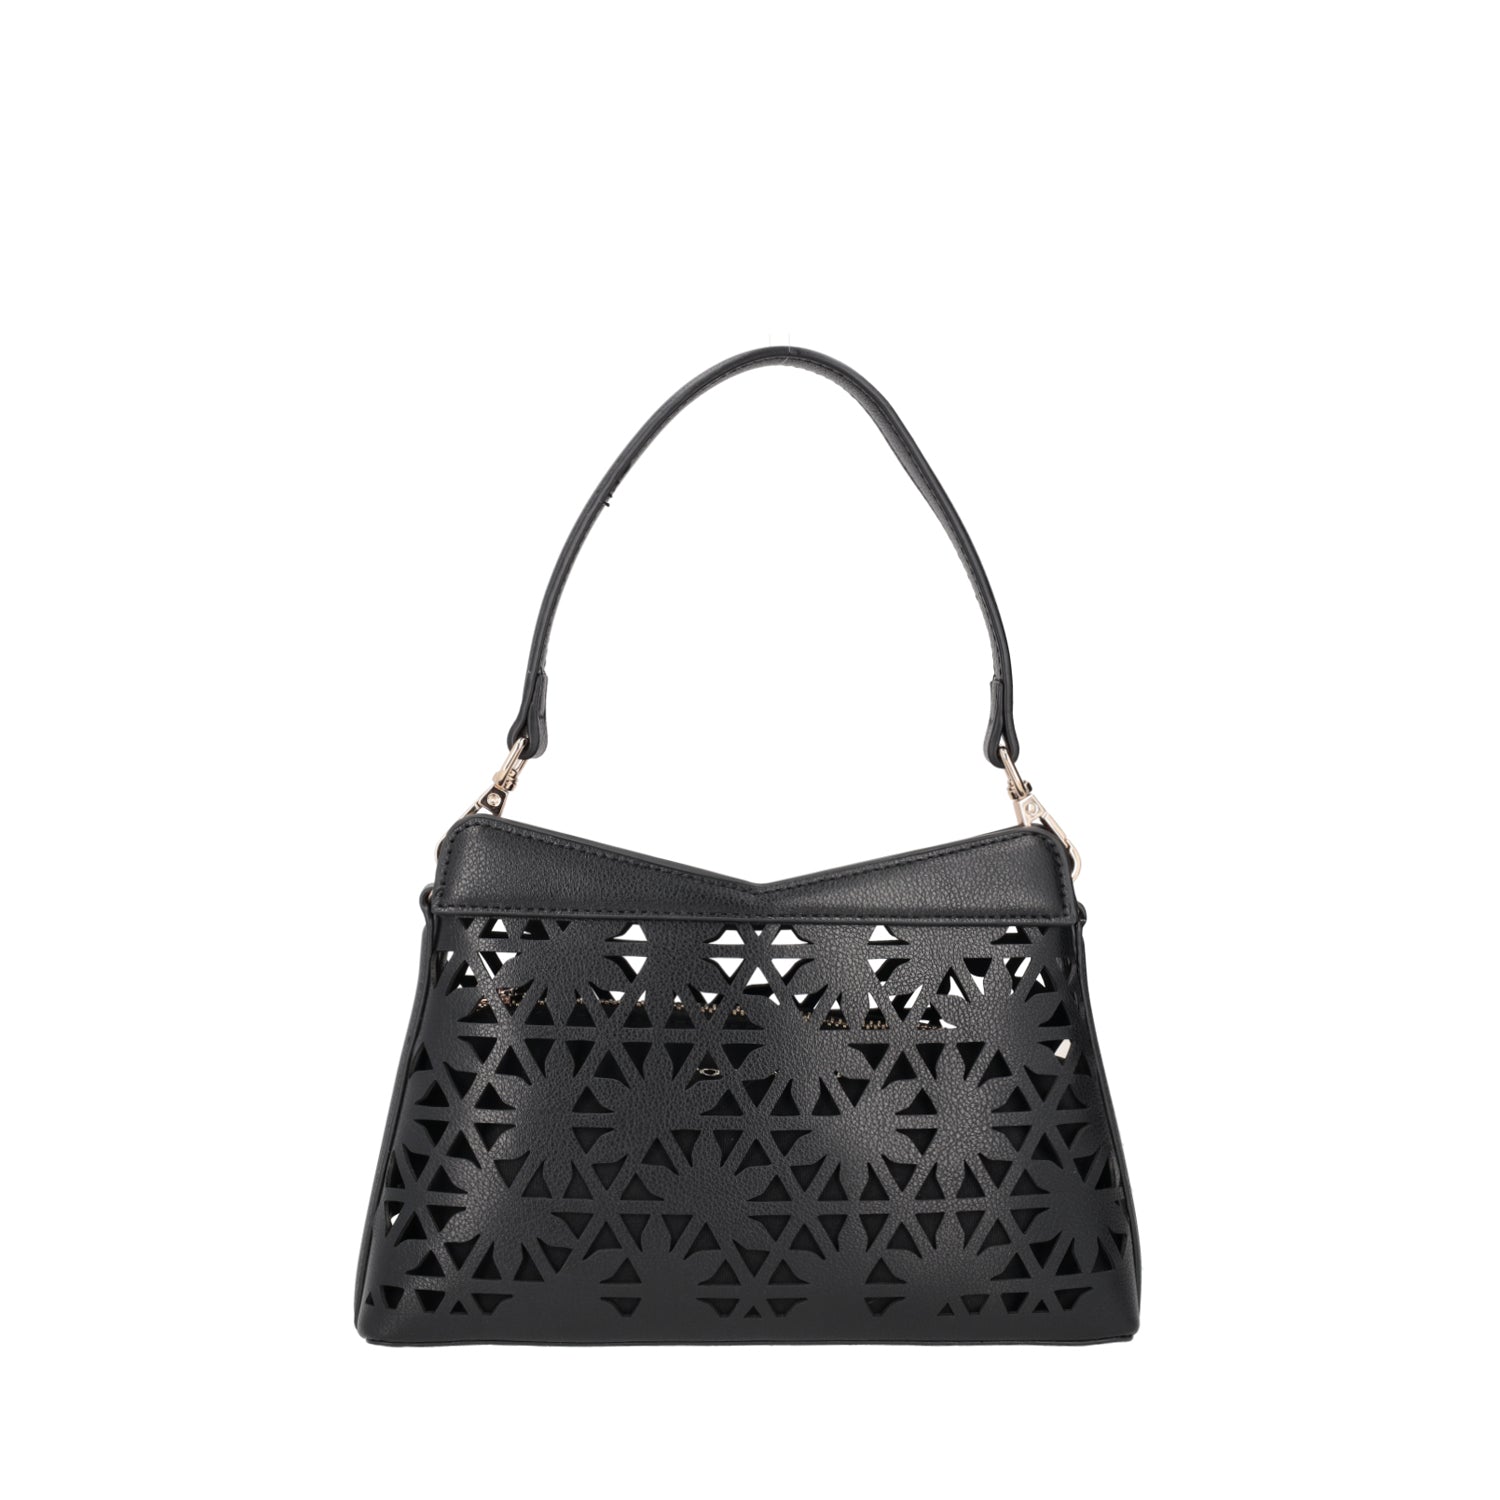 BLACK PEONIA LASERED CROSSBODY BAG WITH GOLD CHAIN